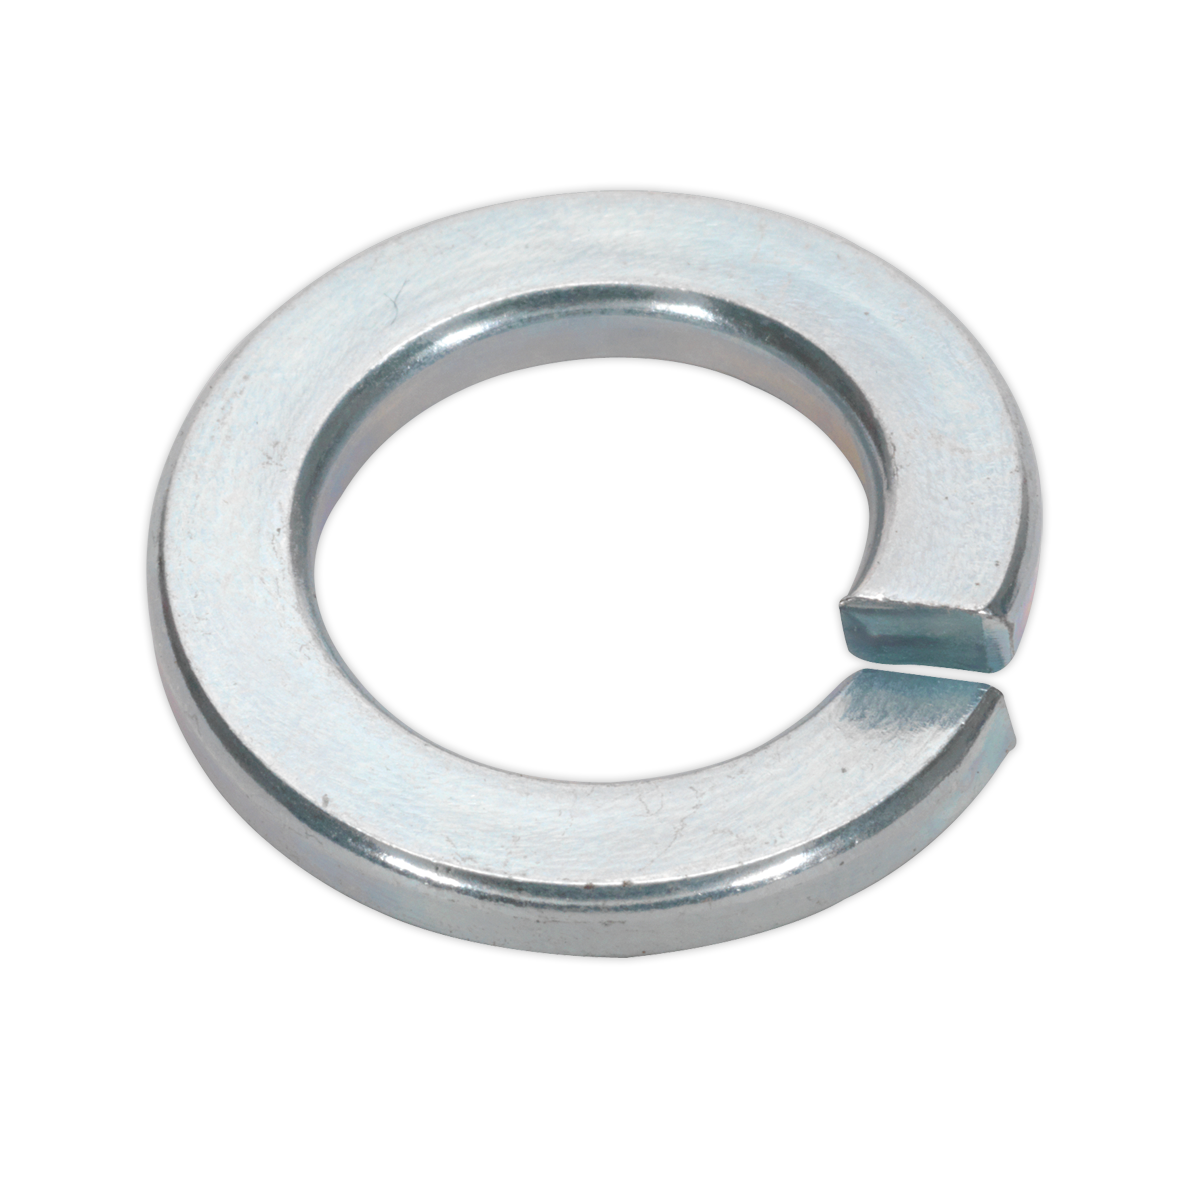 Spring Washer DIN 127B M16 Zinc Pack of 50 - SWM16 - Farming Parts